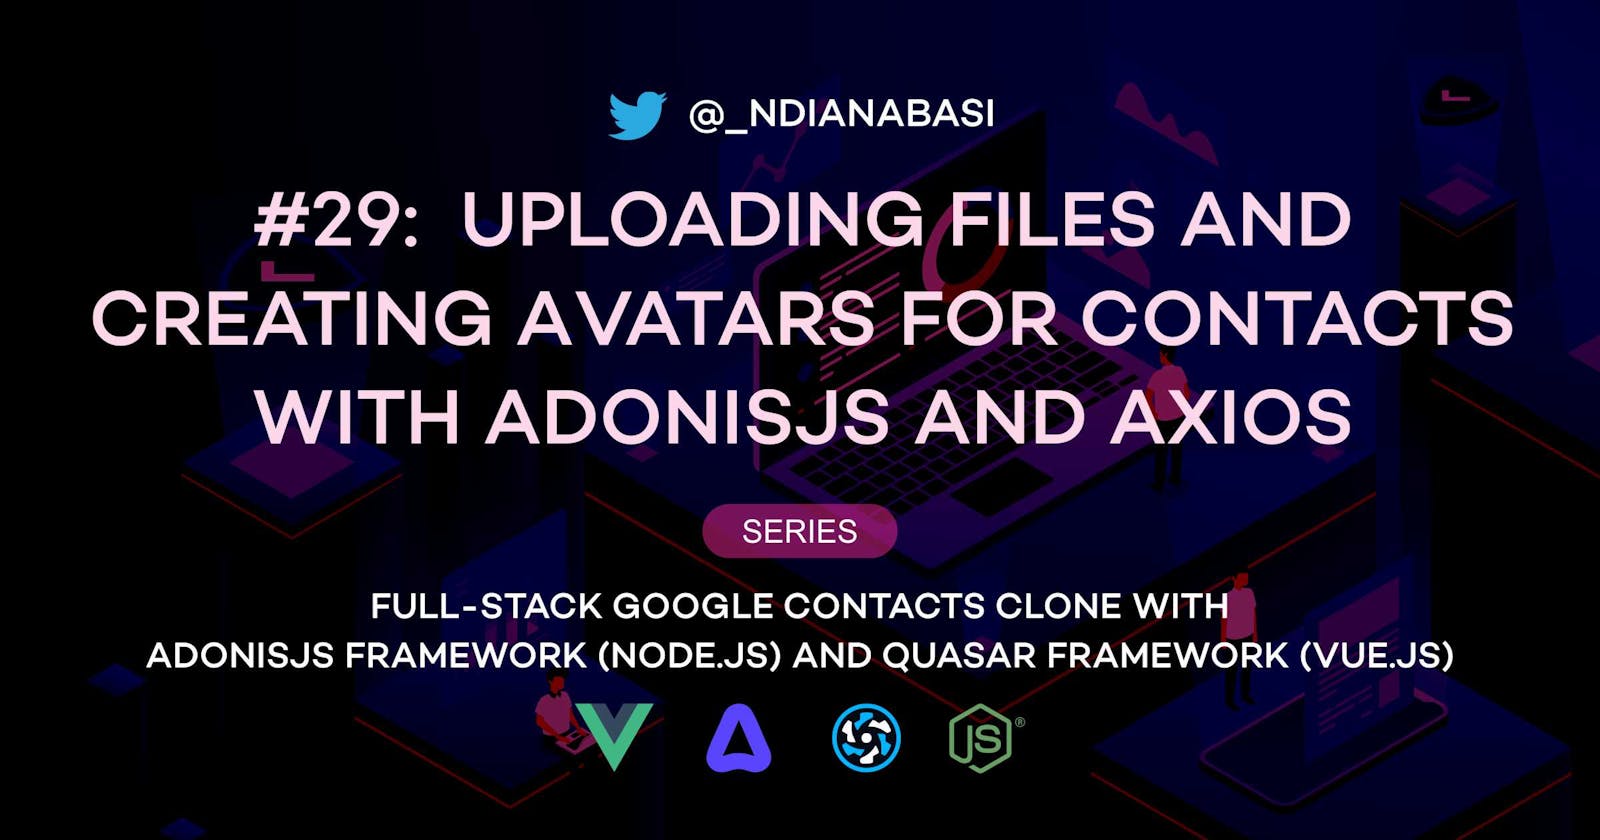 Uploading Files and Creating Avatars for Contacts With AdonisJS and Axios